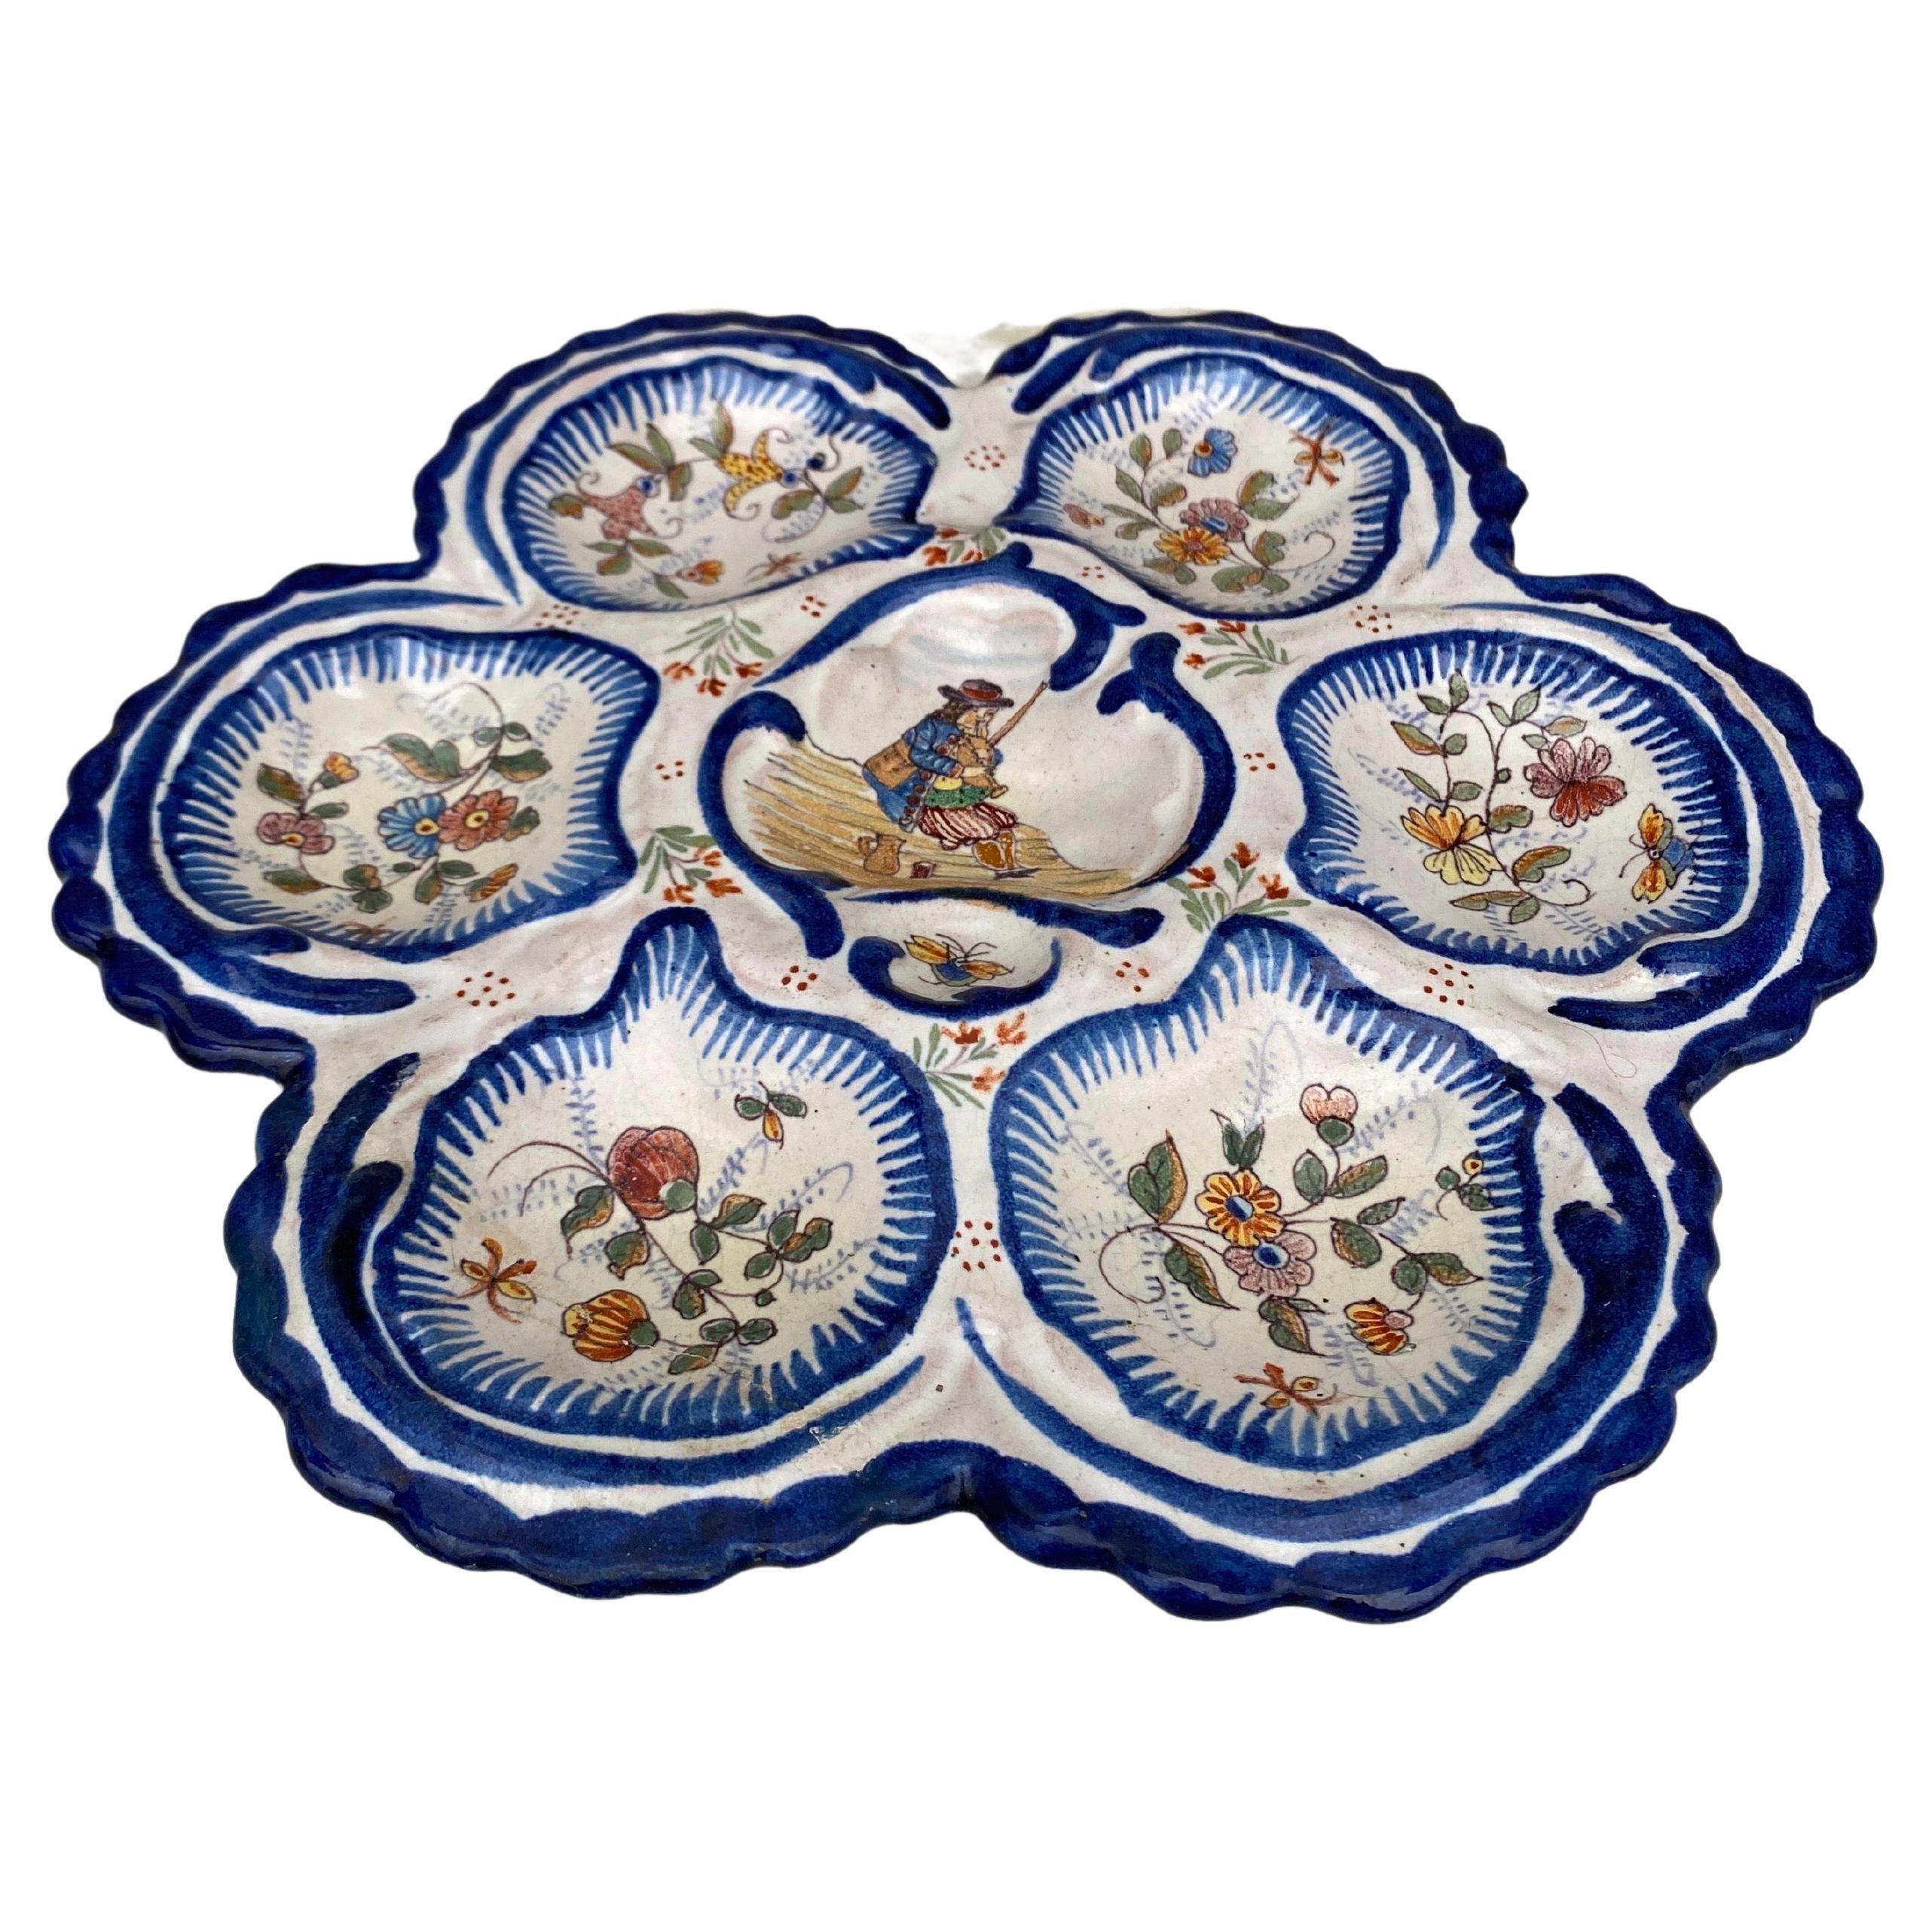 Antique rare large French faience oyster plate, circa 1890 made by the manufacture of Malicorne with a Breton man on the center and flowers and butterflies.